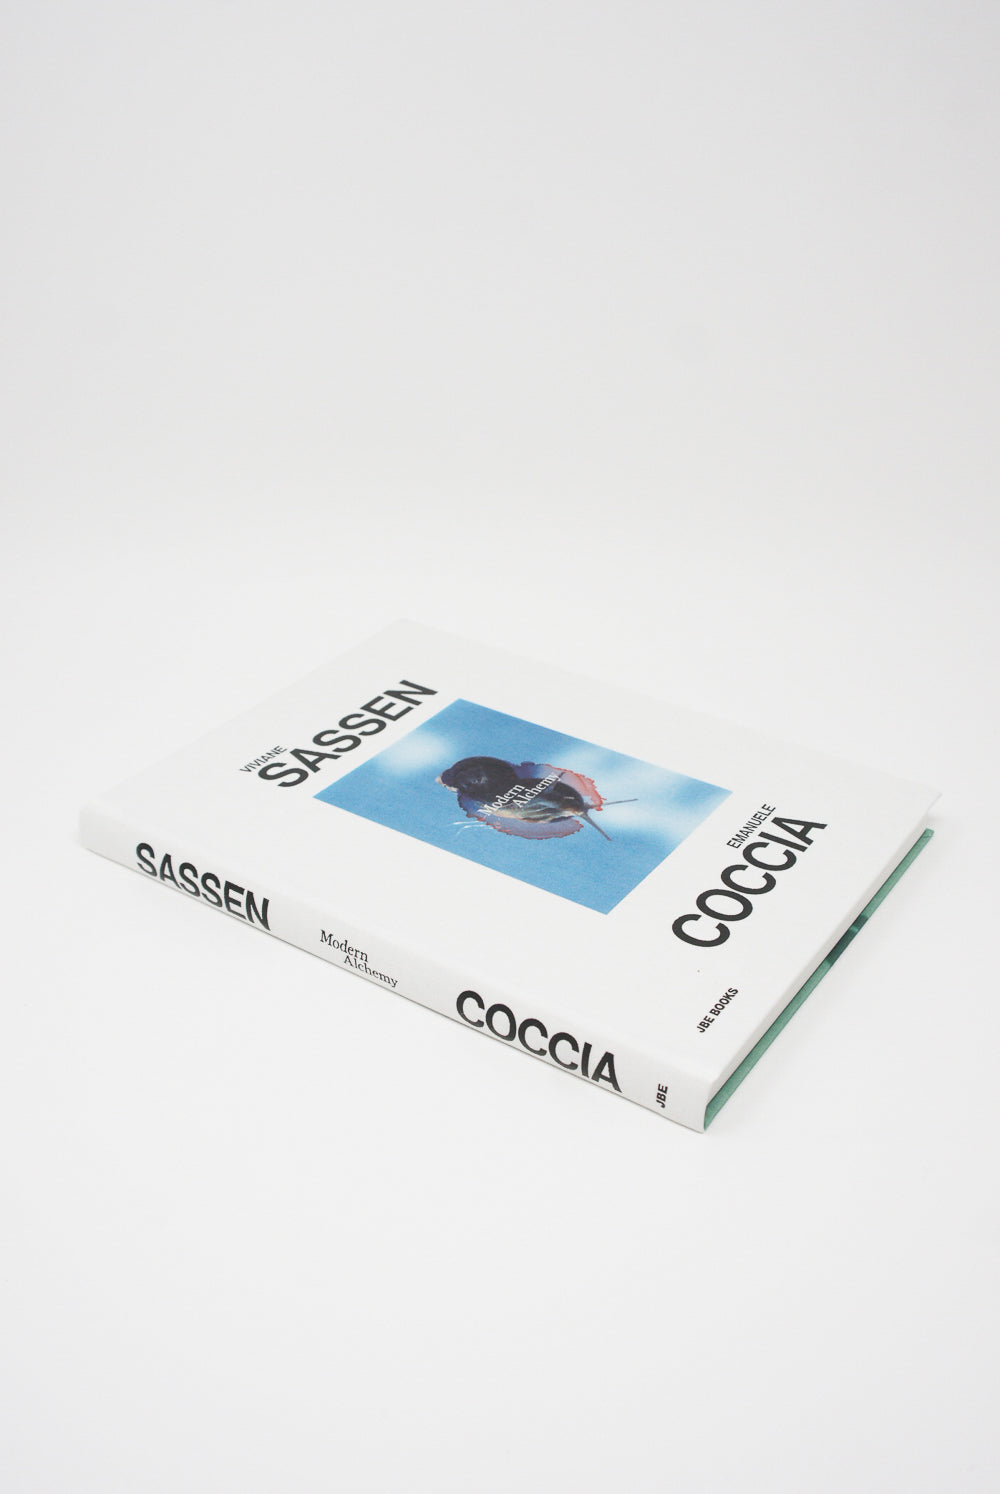 A Viviane Sassen & Emanuele Coccia: Modern Alchemy photobook featuring a captivating portrait of a person against a bright, white backdrop, brought to you by Artbook/D.A.P.